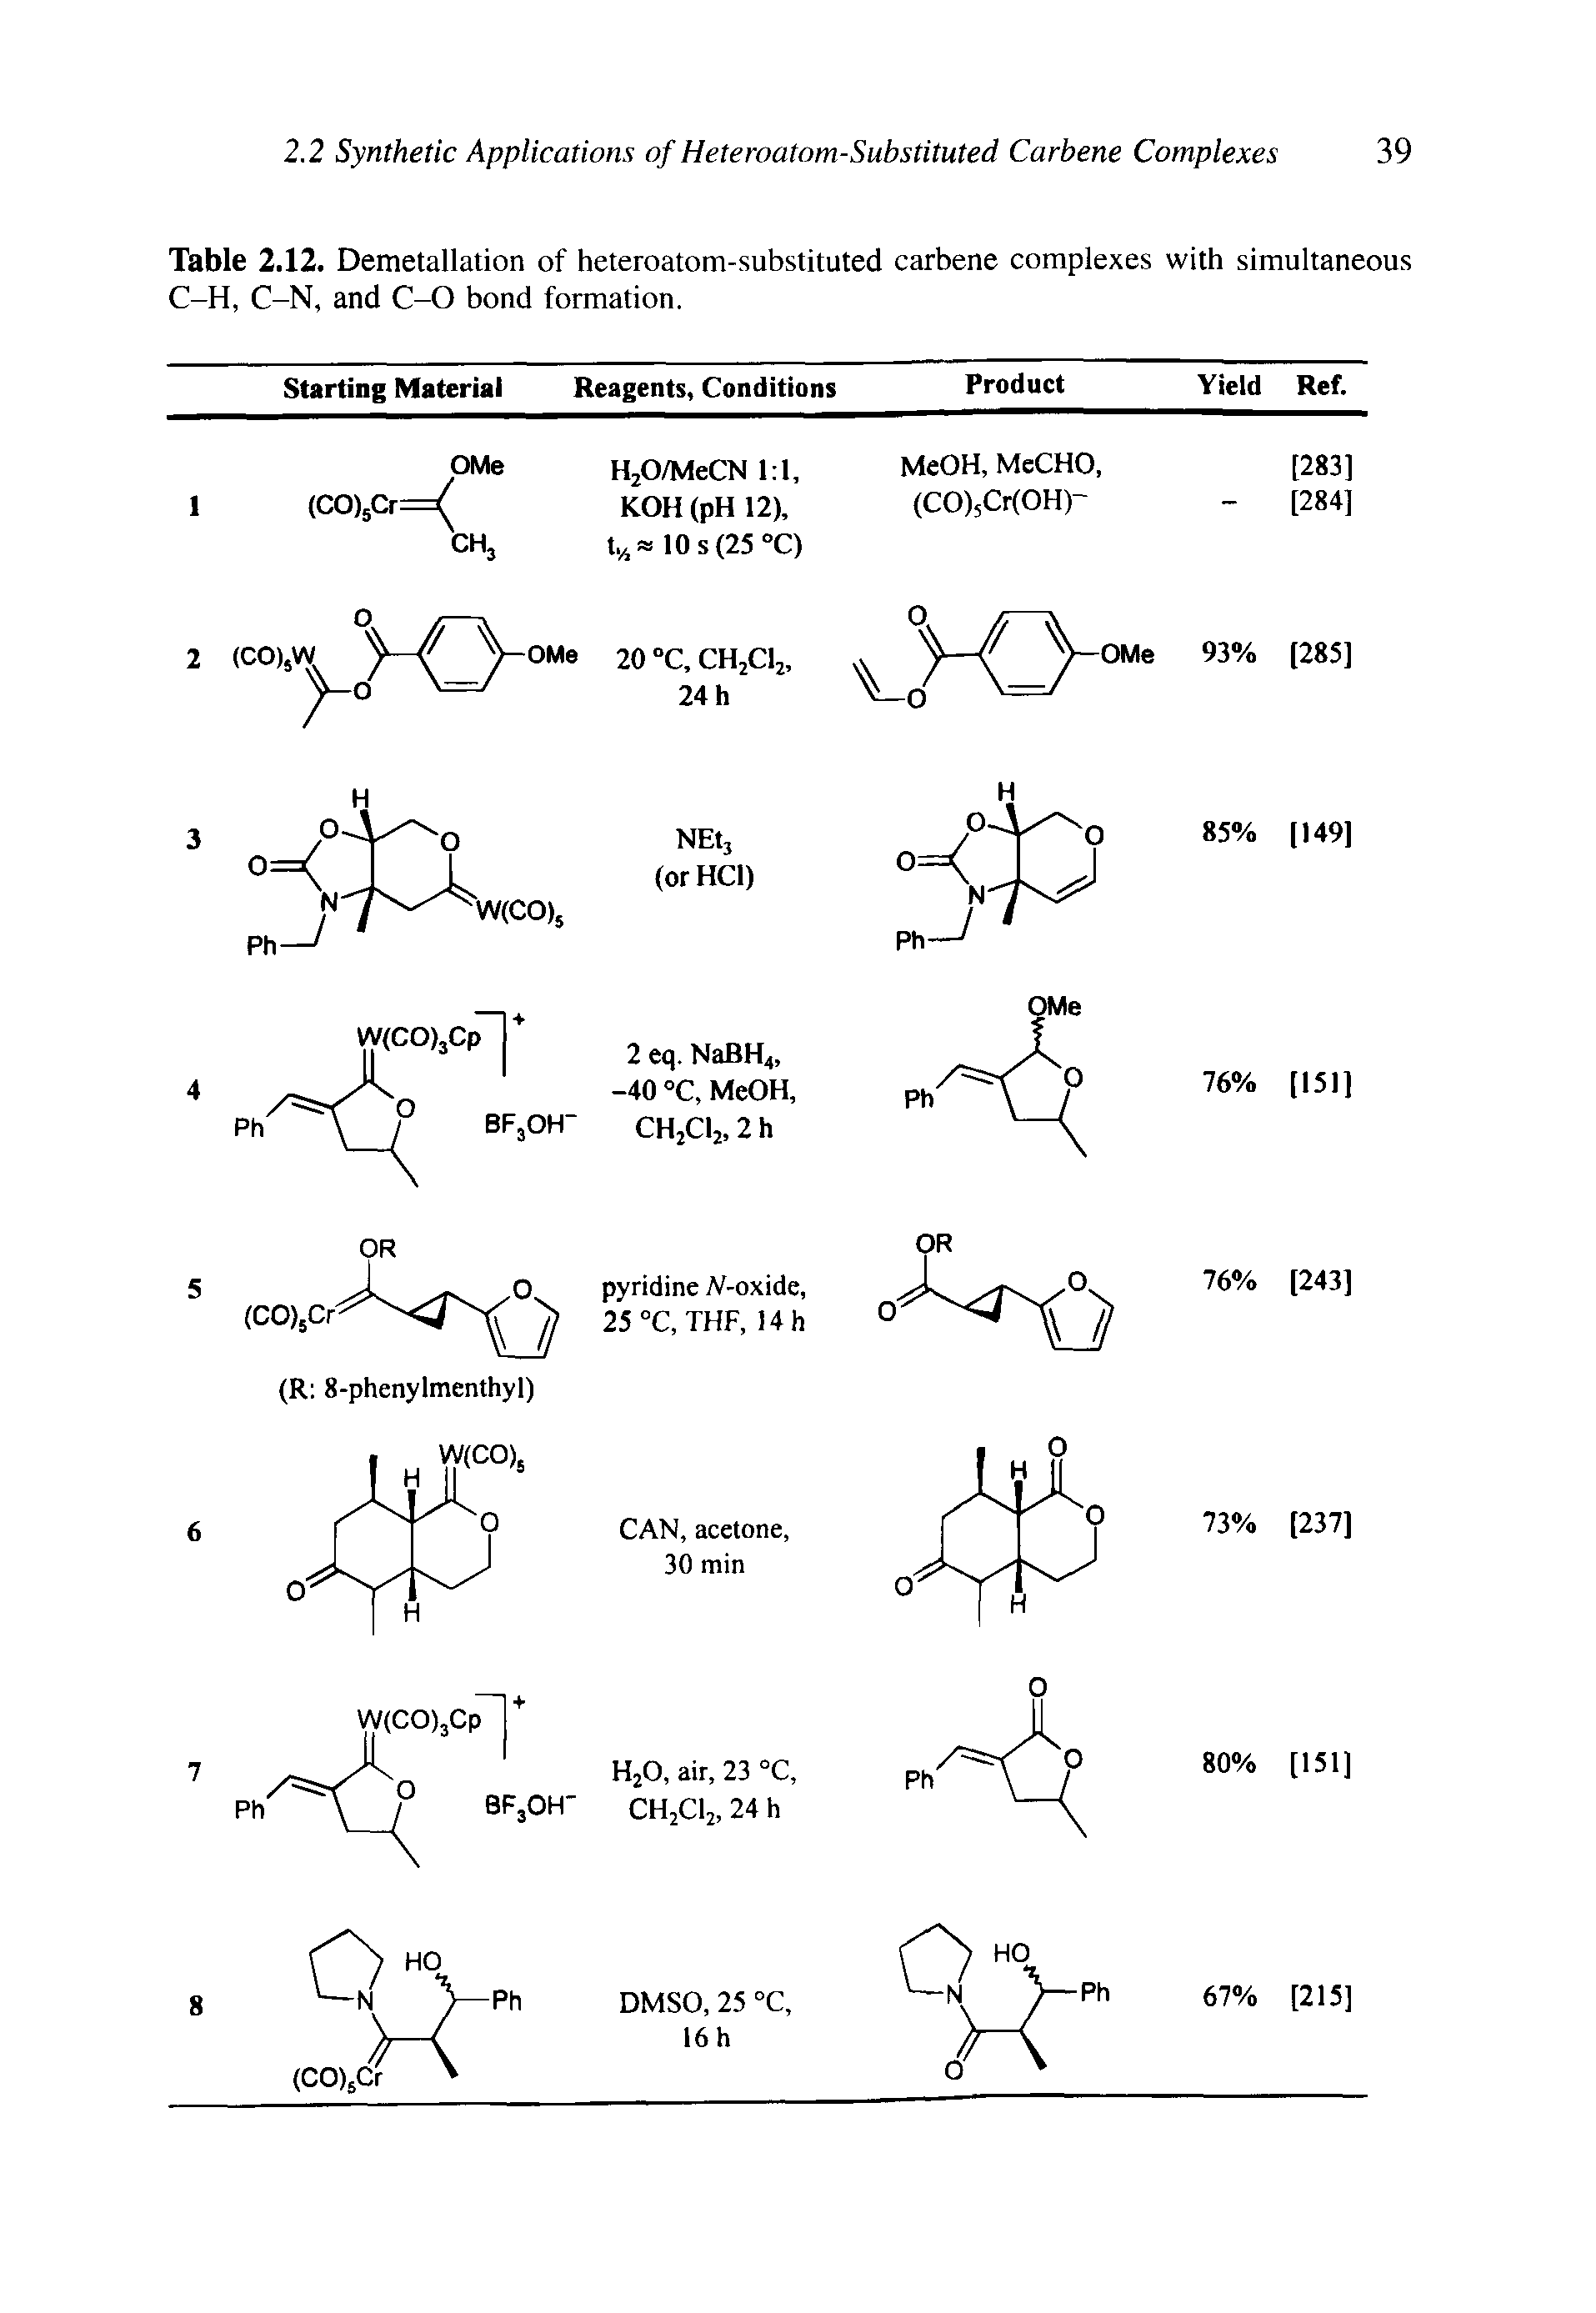 Table 2.12. Demetallation of heteroatom-substituted carbene complexes with simultaneous C-H, C-N, and C-O bond formation.